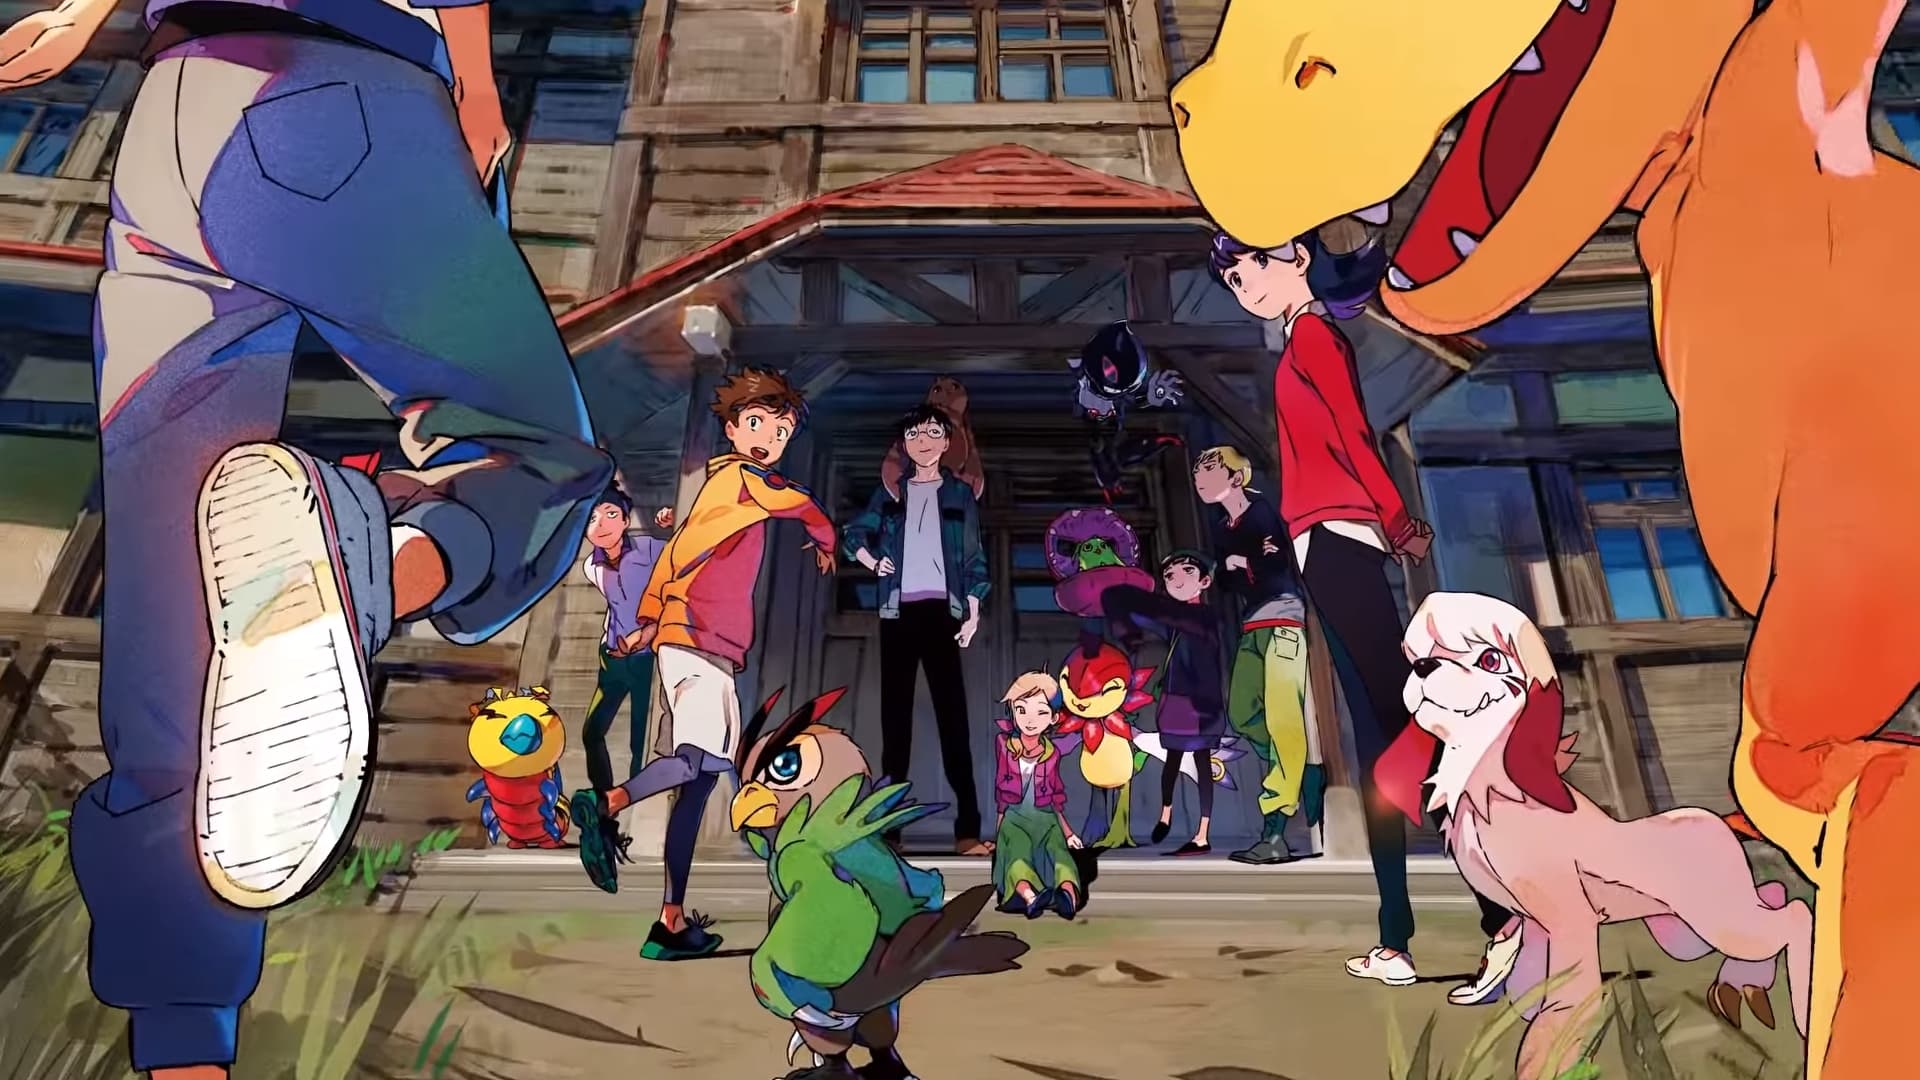 Digimon Survive Review: A Story Anime Fans Should Approach With